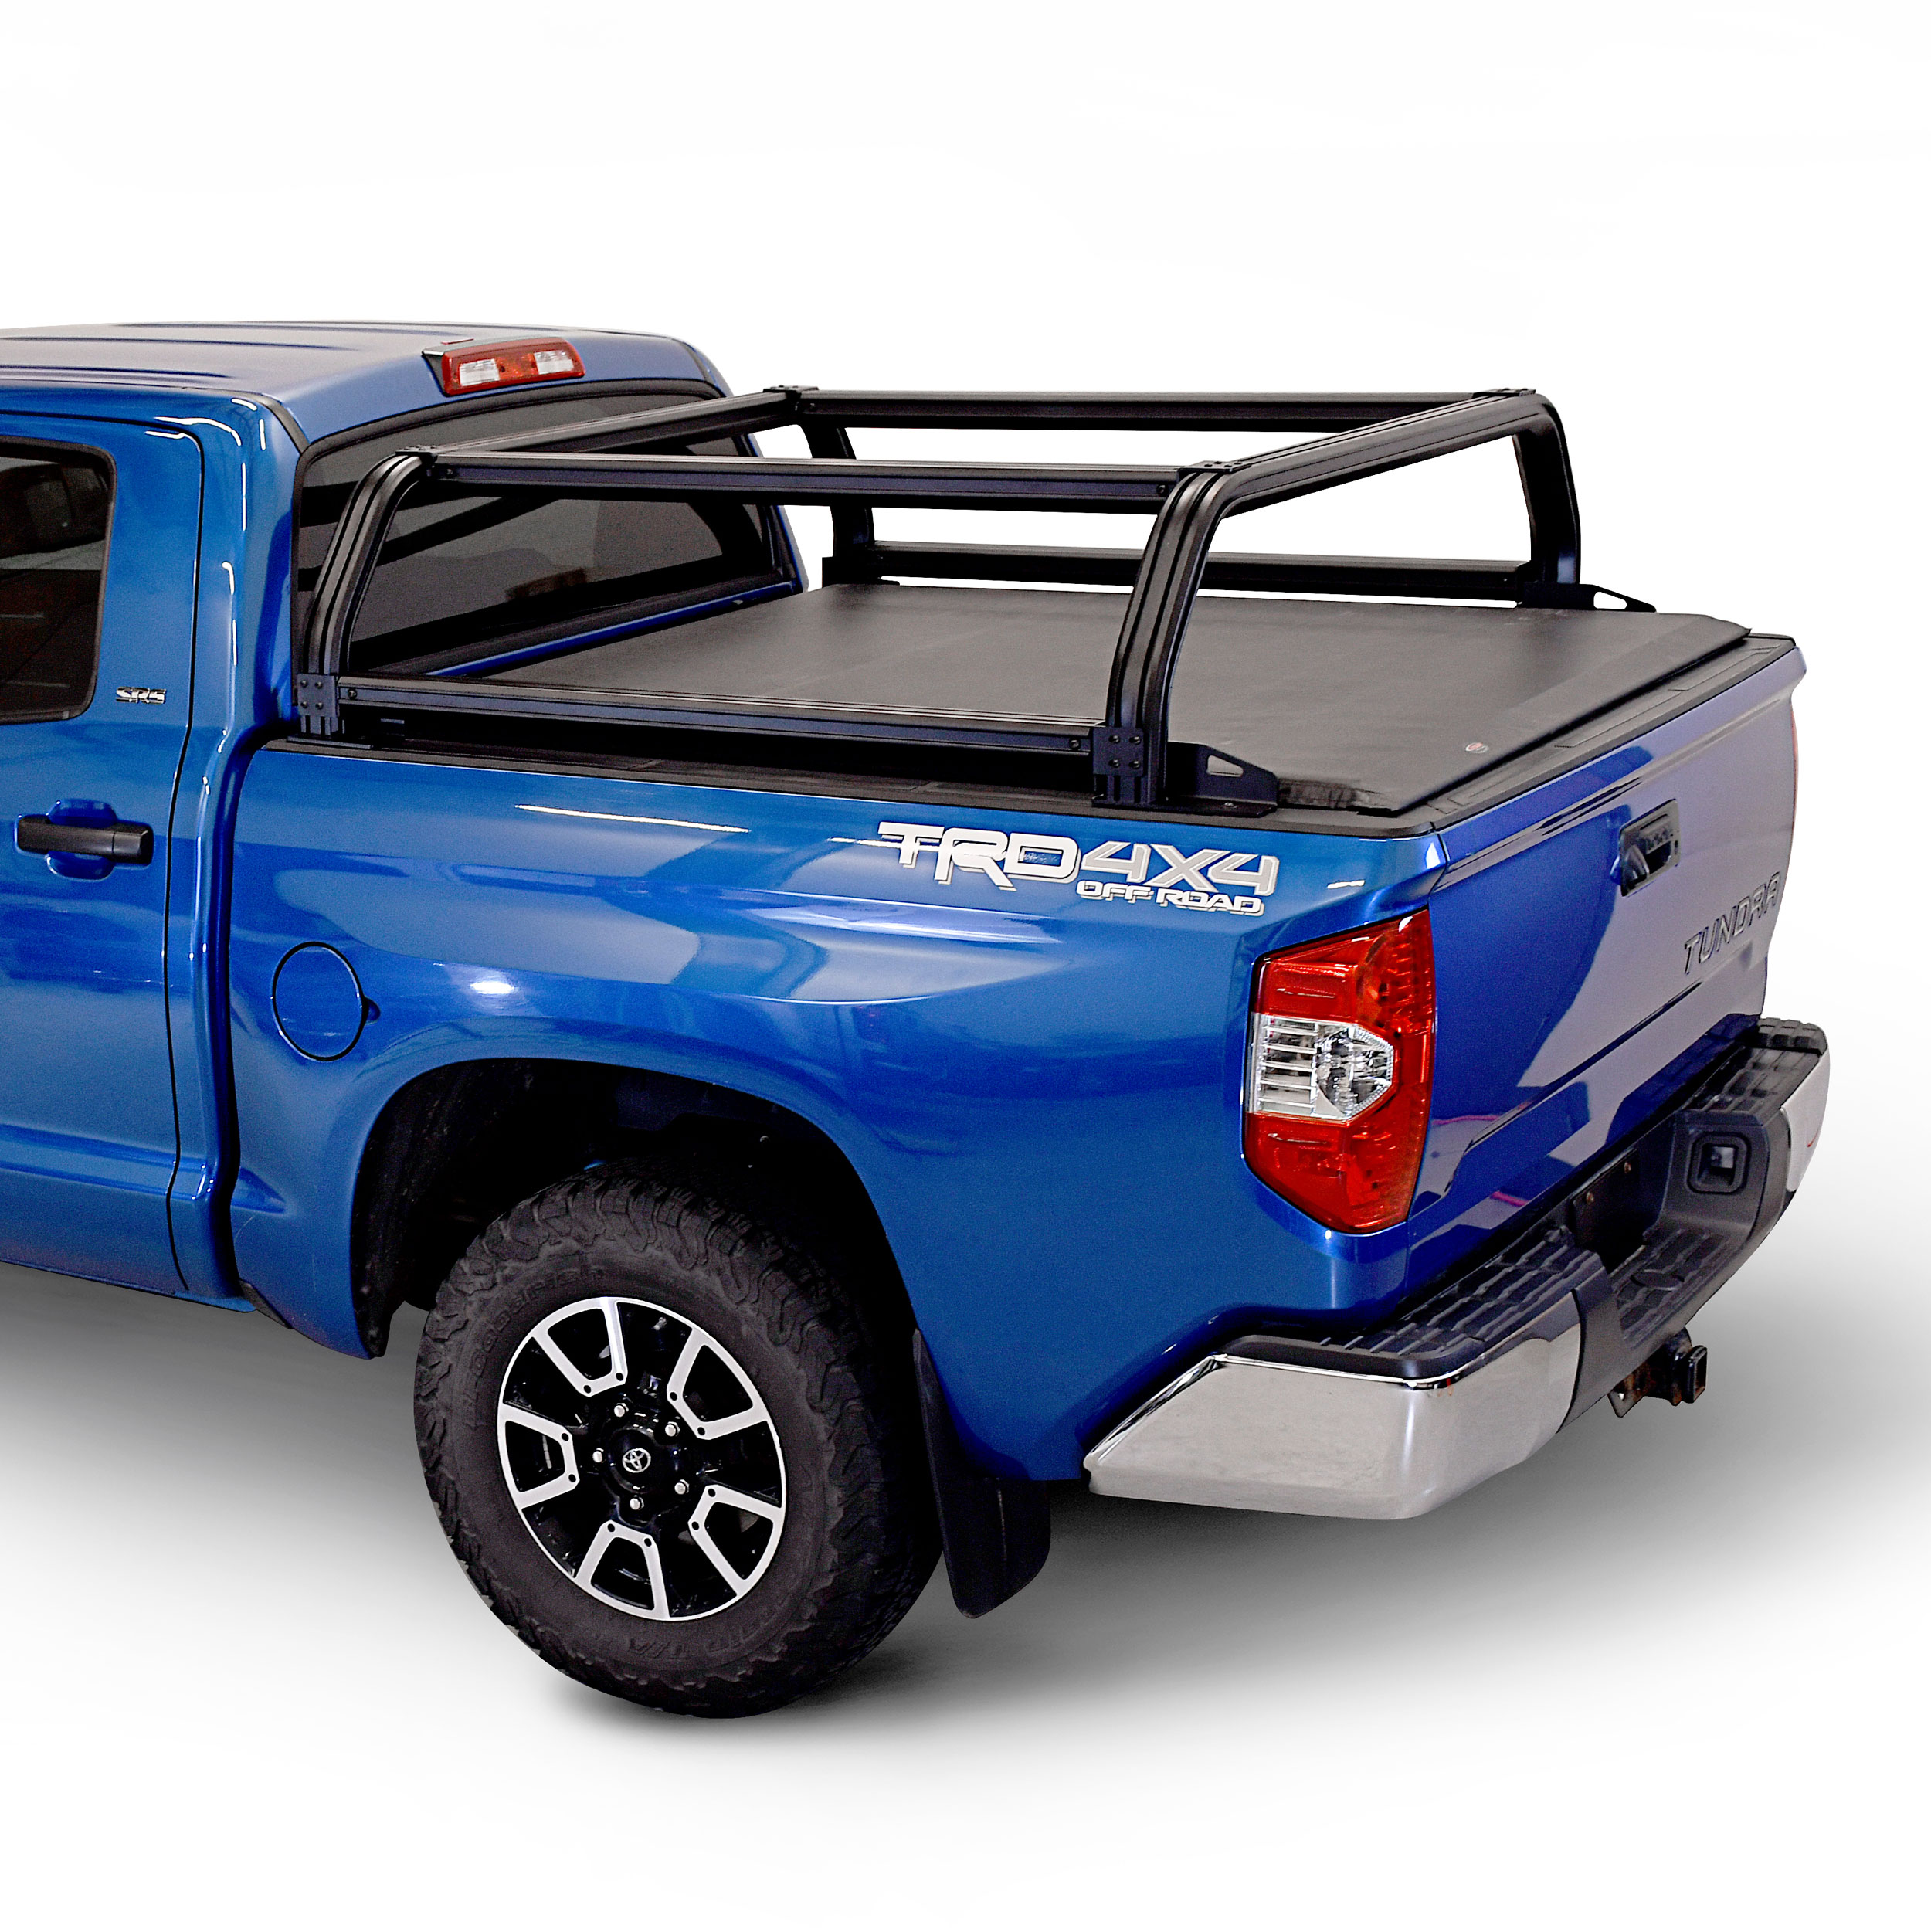 Toyota Tundra Bed Cover For Your Truck - Peragon®